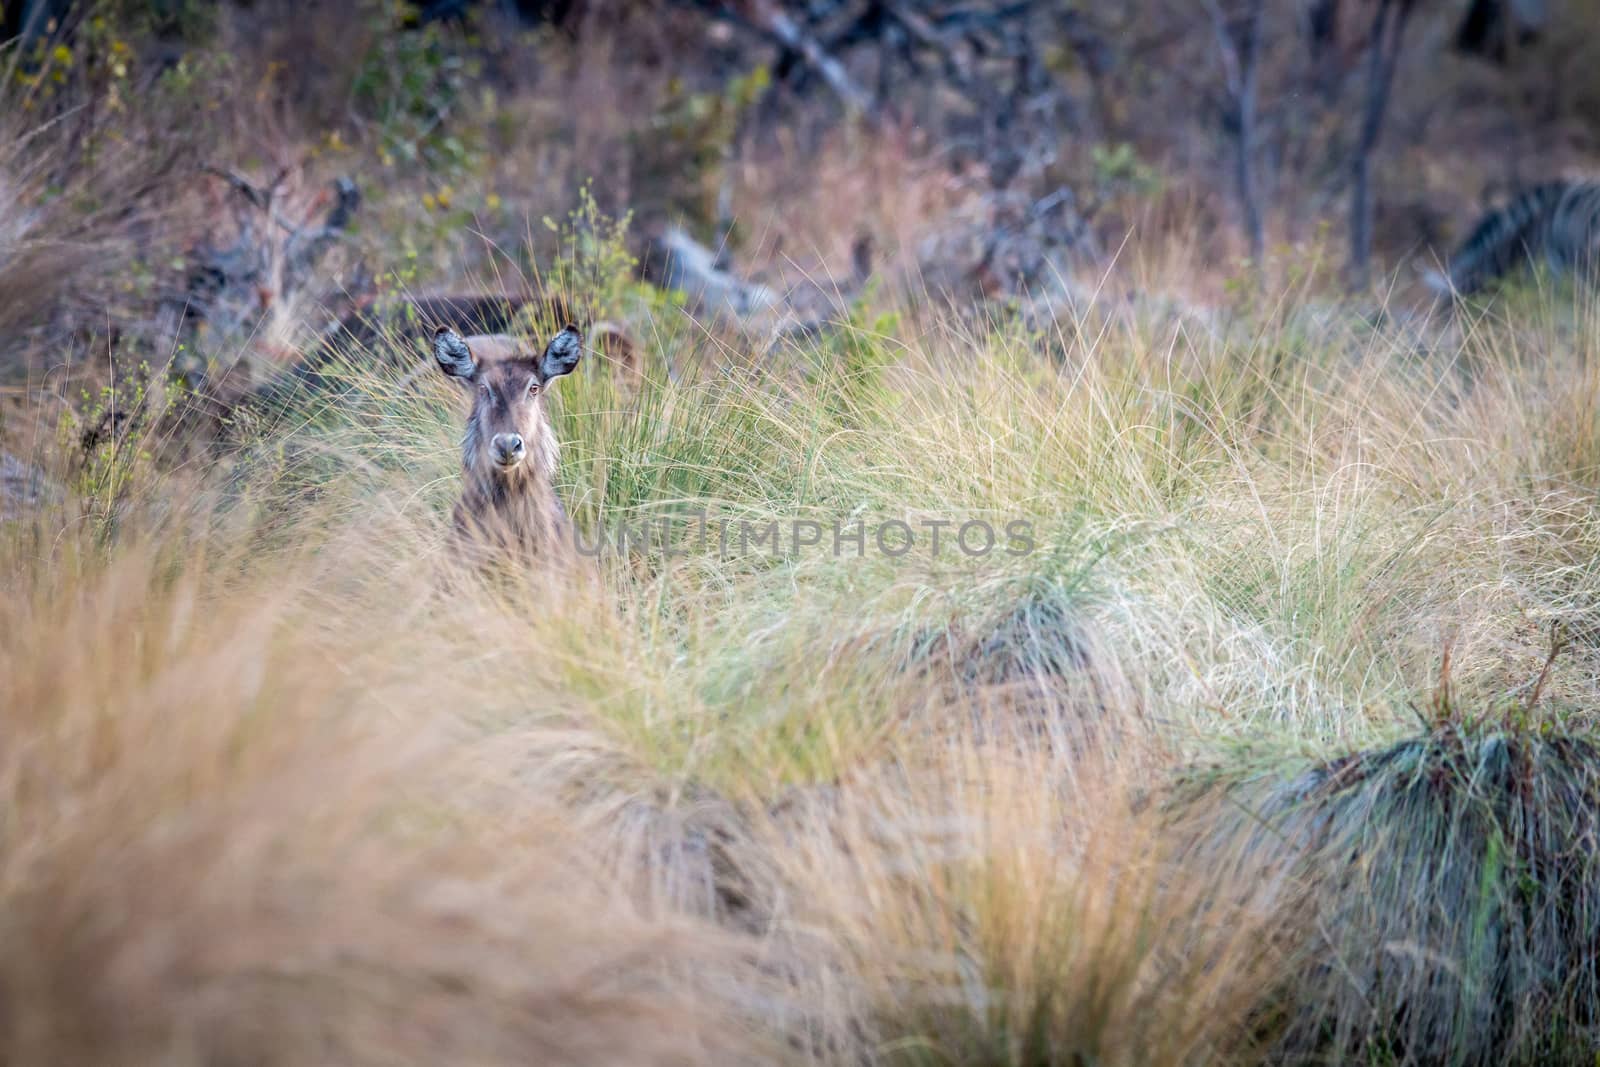 Waterbuck starring from behind high grass in the Welgevonden game reserve, South Africa.